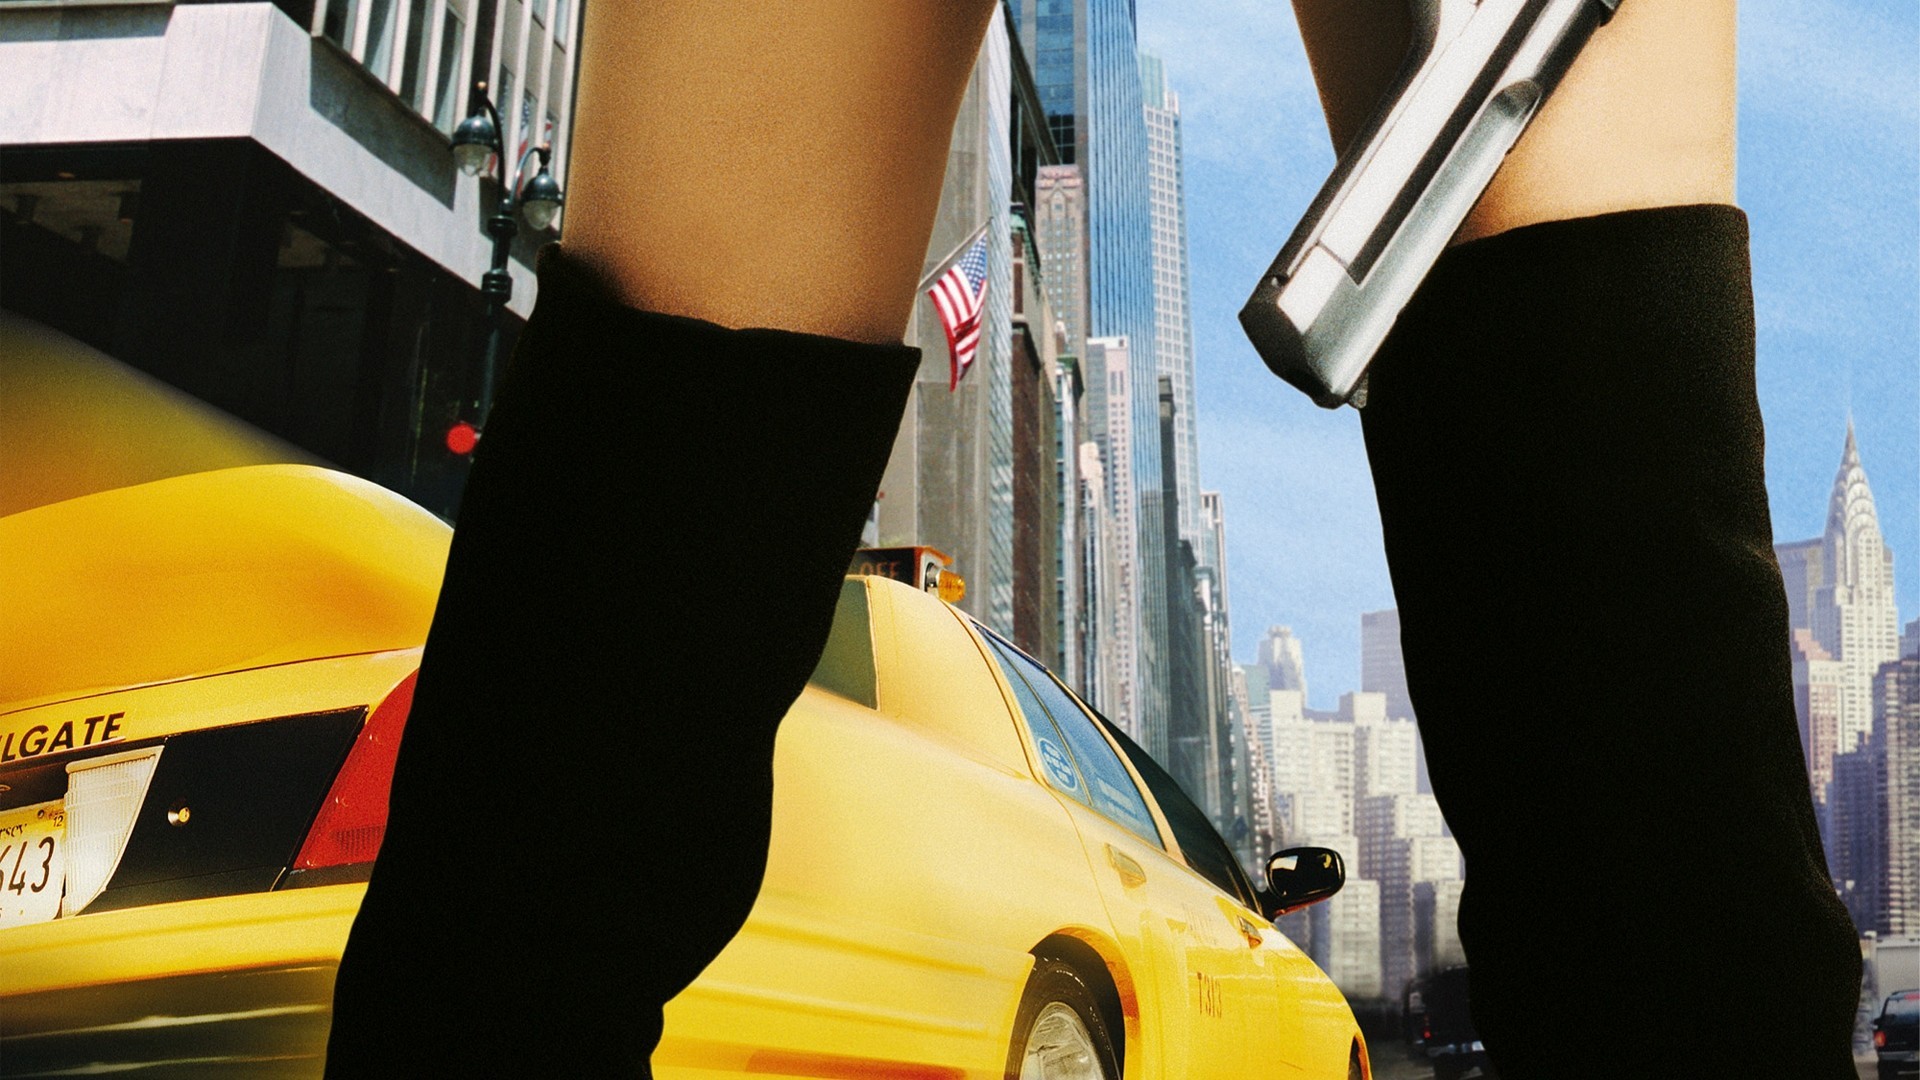 General 1920x1080 movies New York Taxi taxi car vehicle legs yellow cars